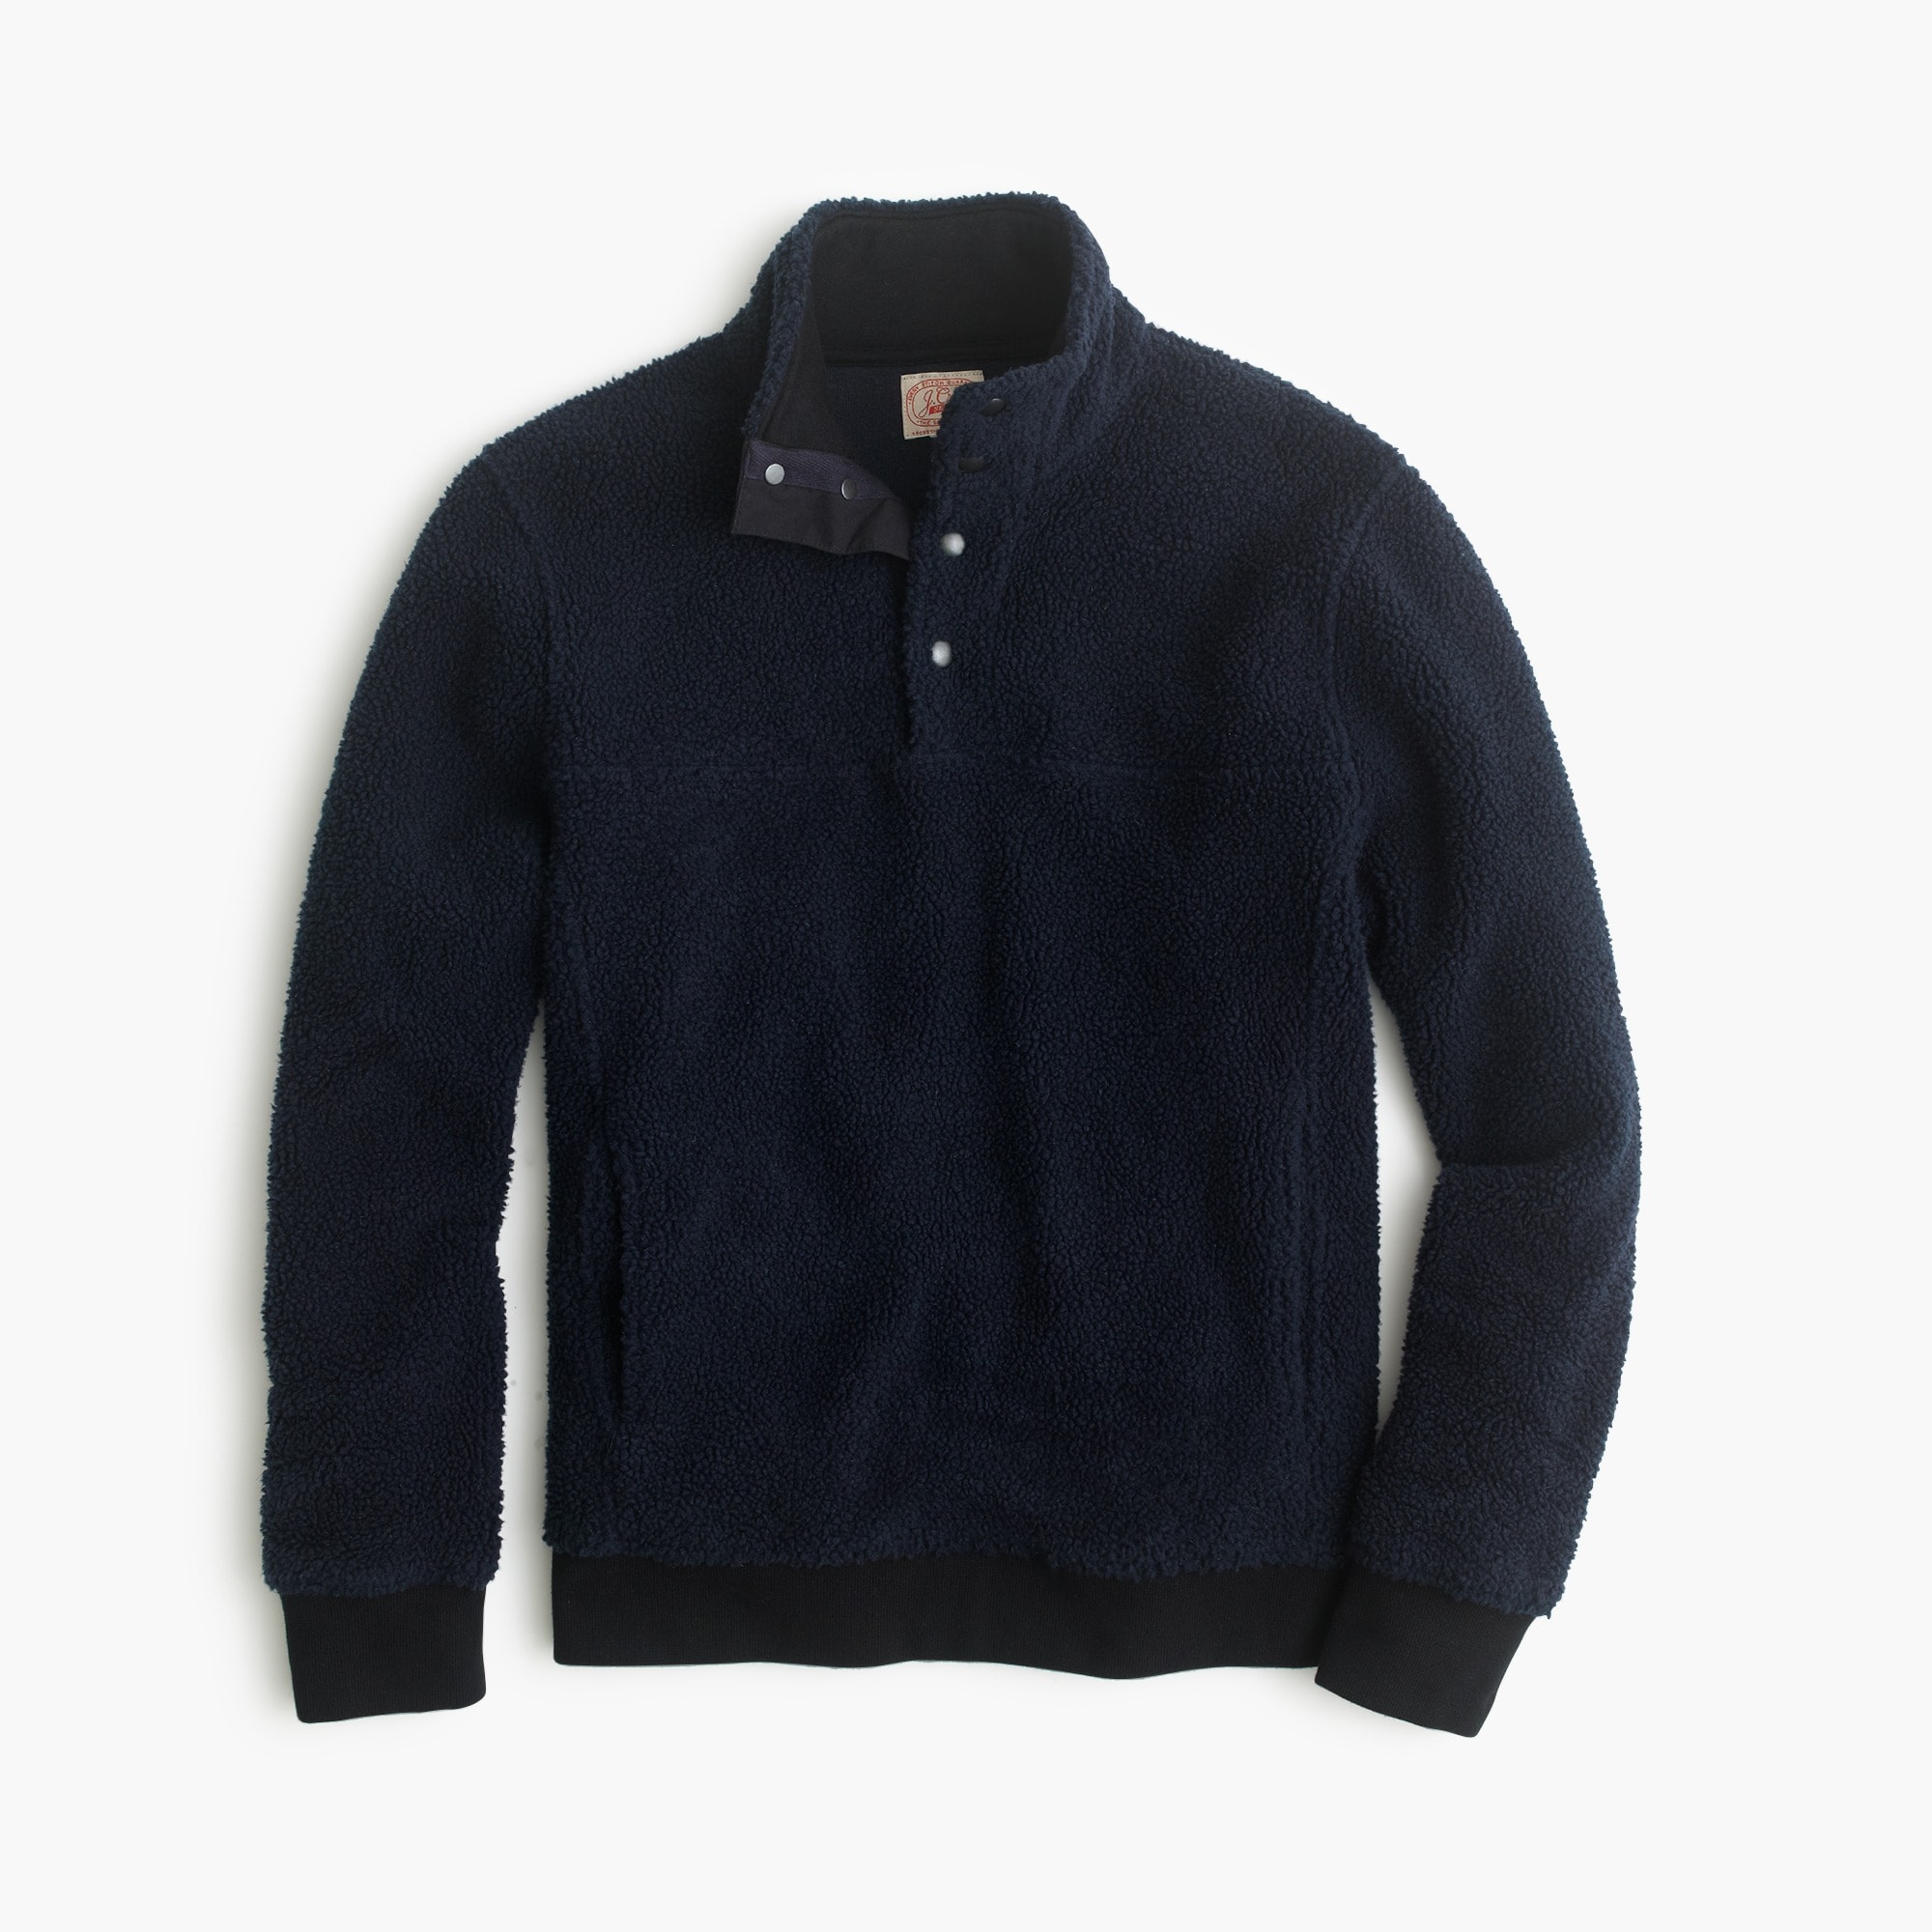 Grizzly fleece pullover jacket : | J.Crew